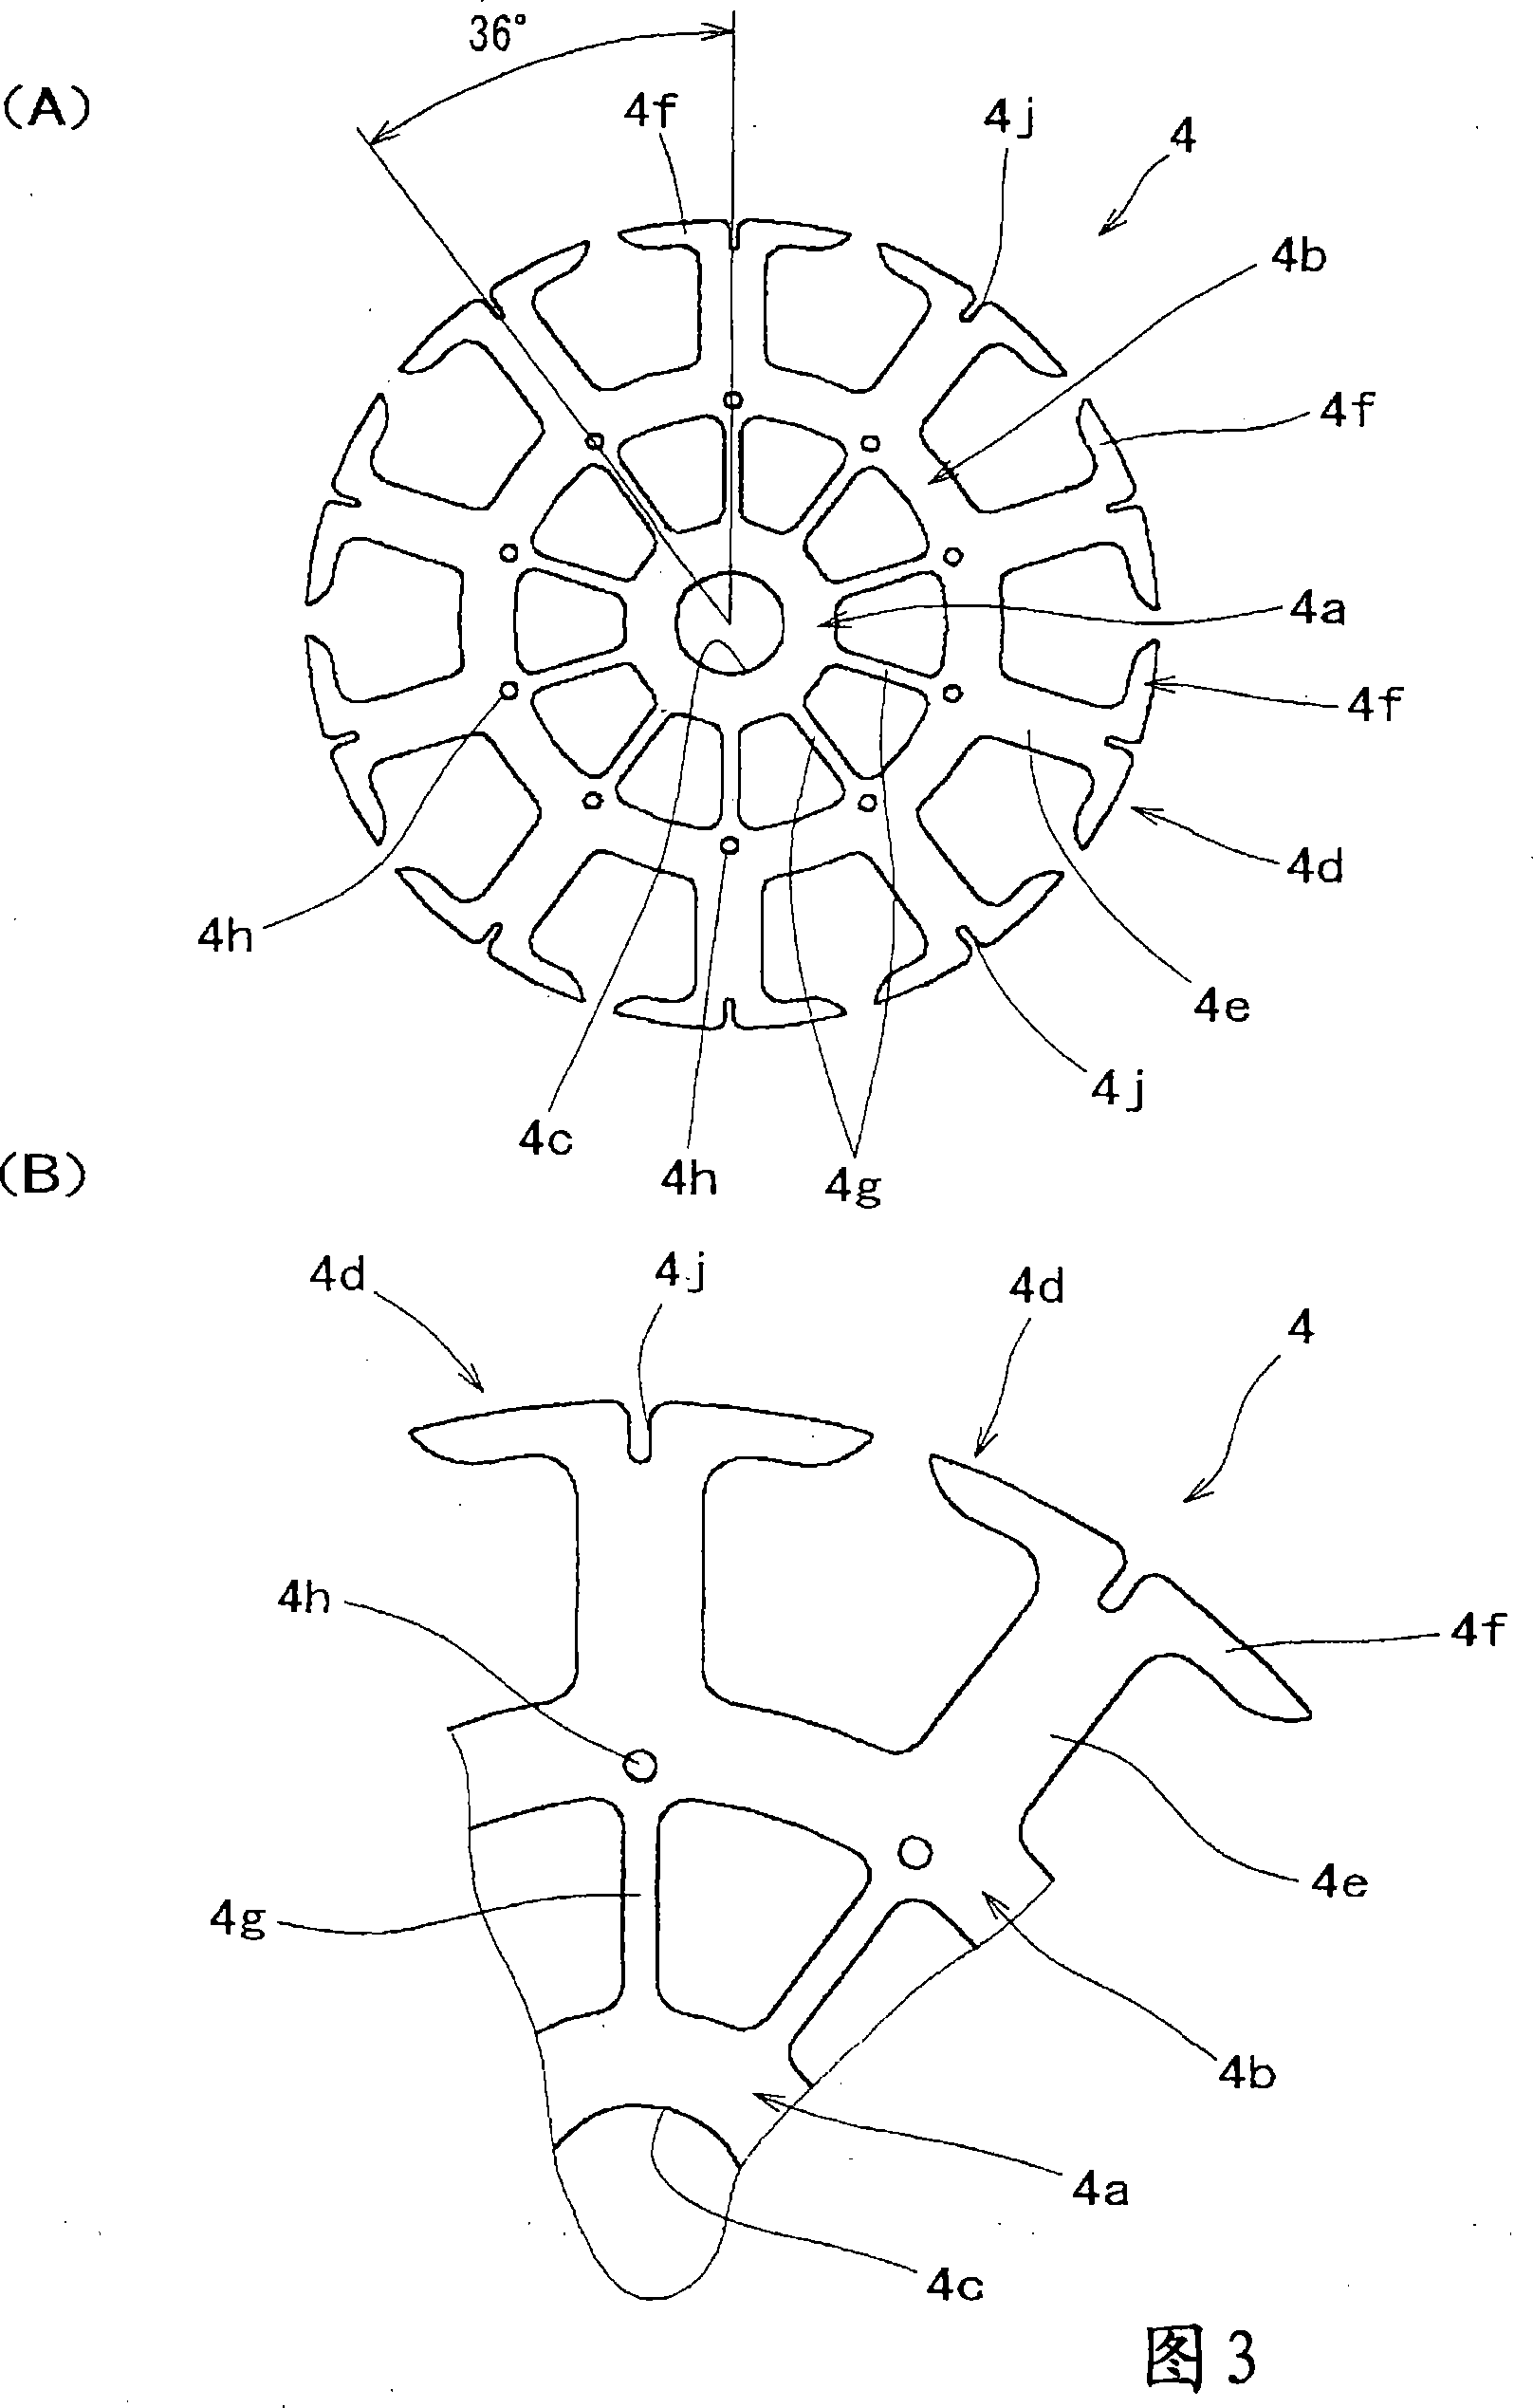 Armature of rotating electric machine and method of manufacturing the same